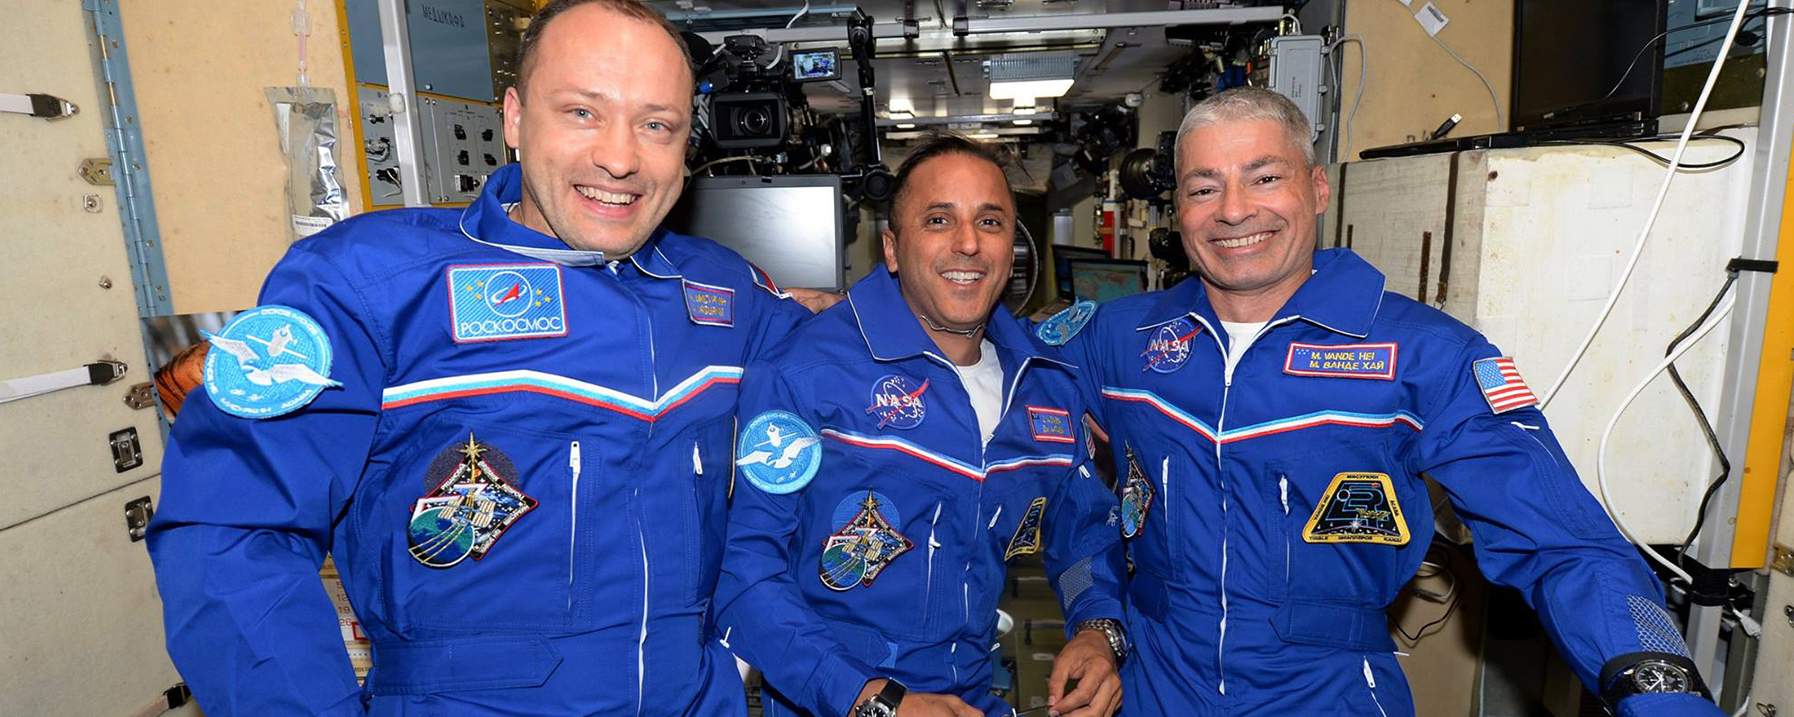 Expedition 53 Crew Members on the International Space Station